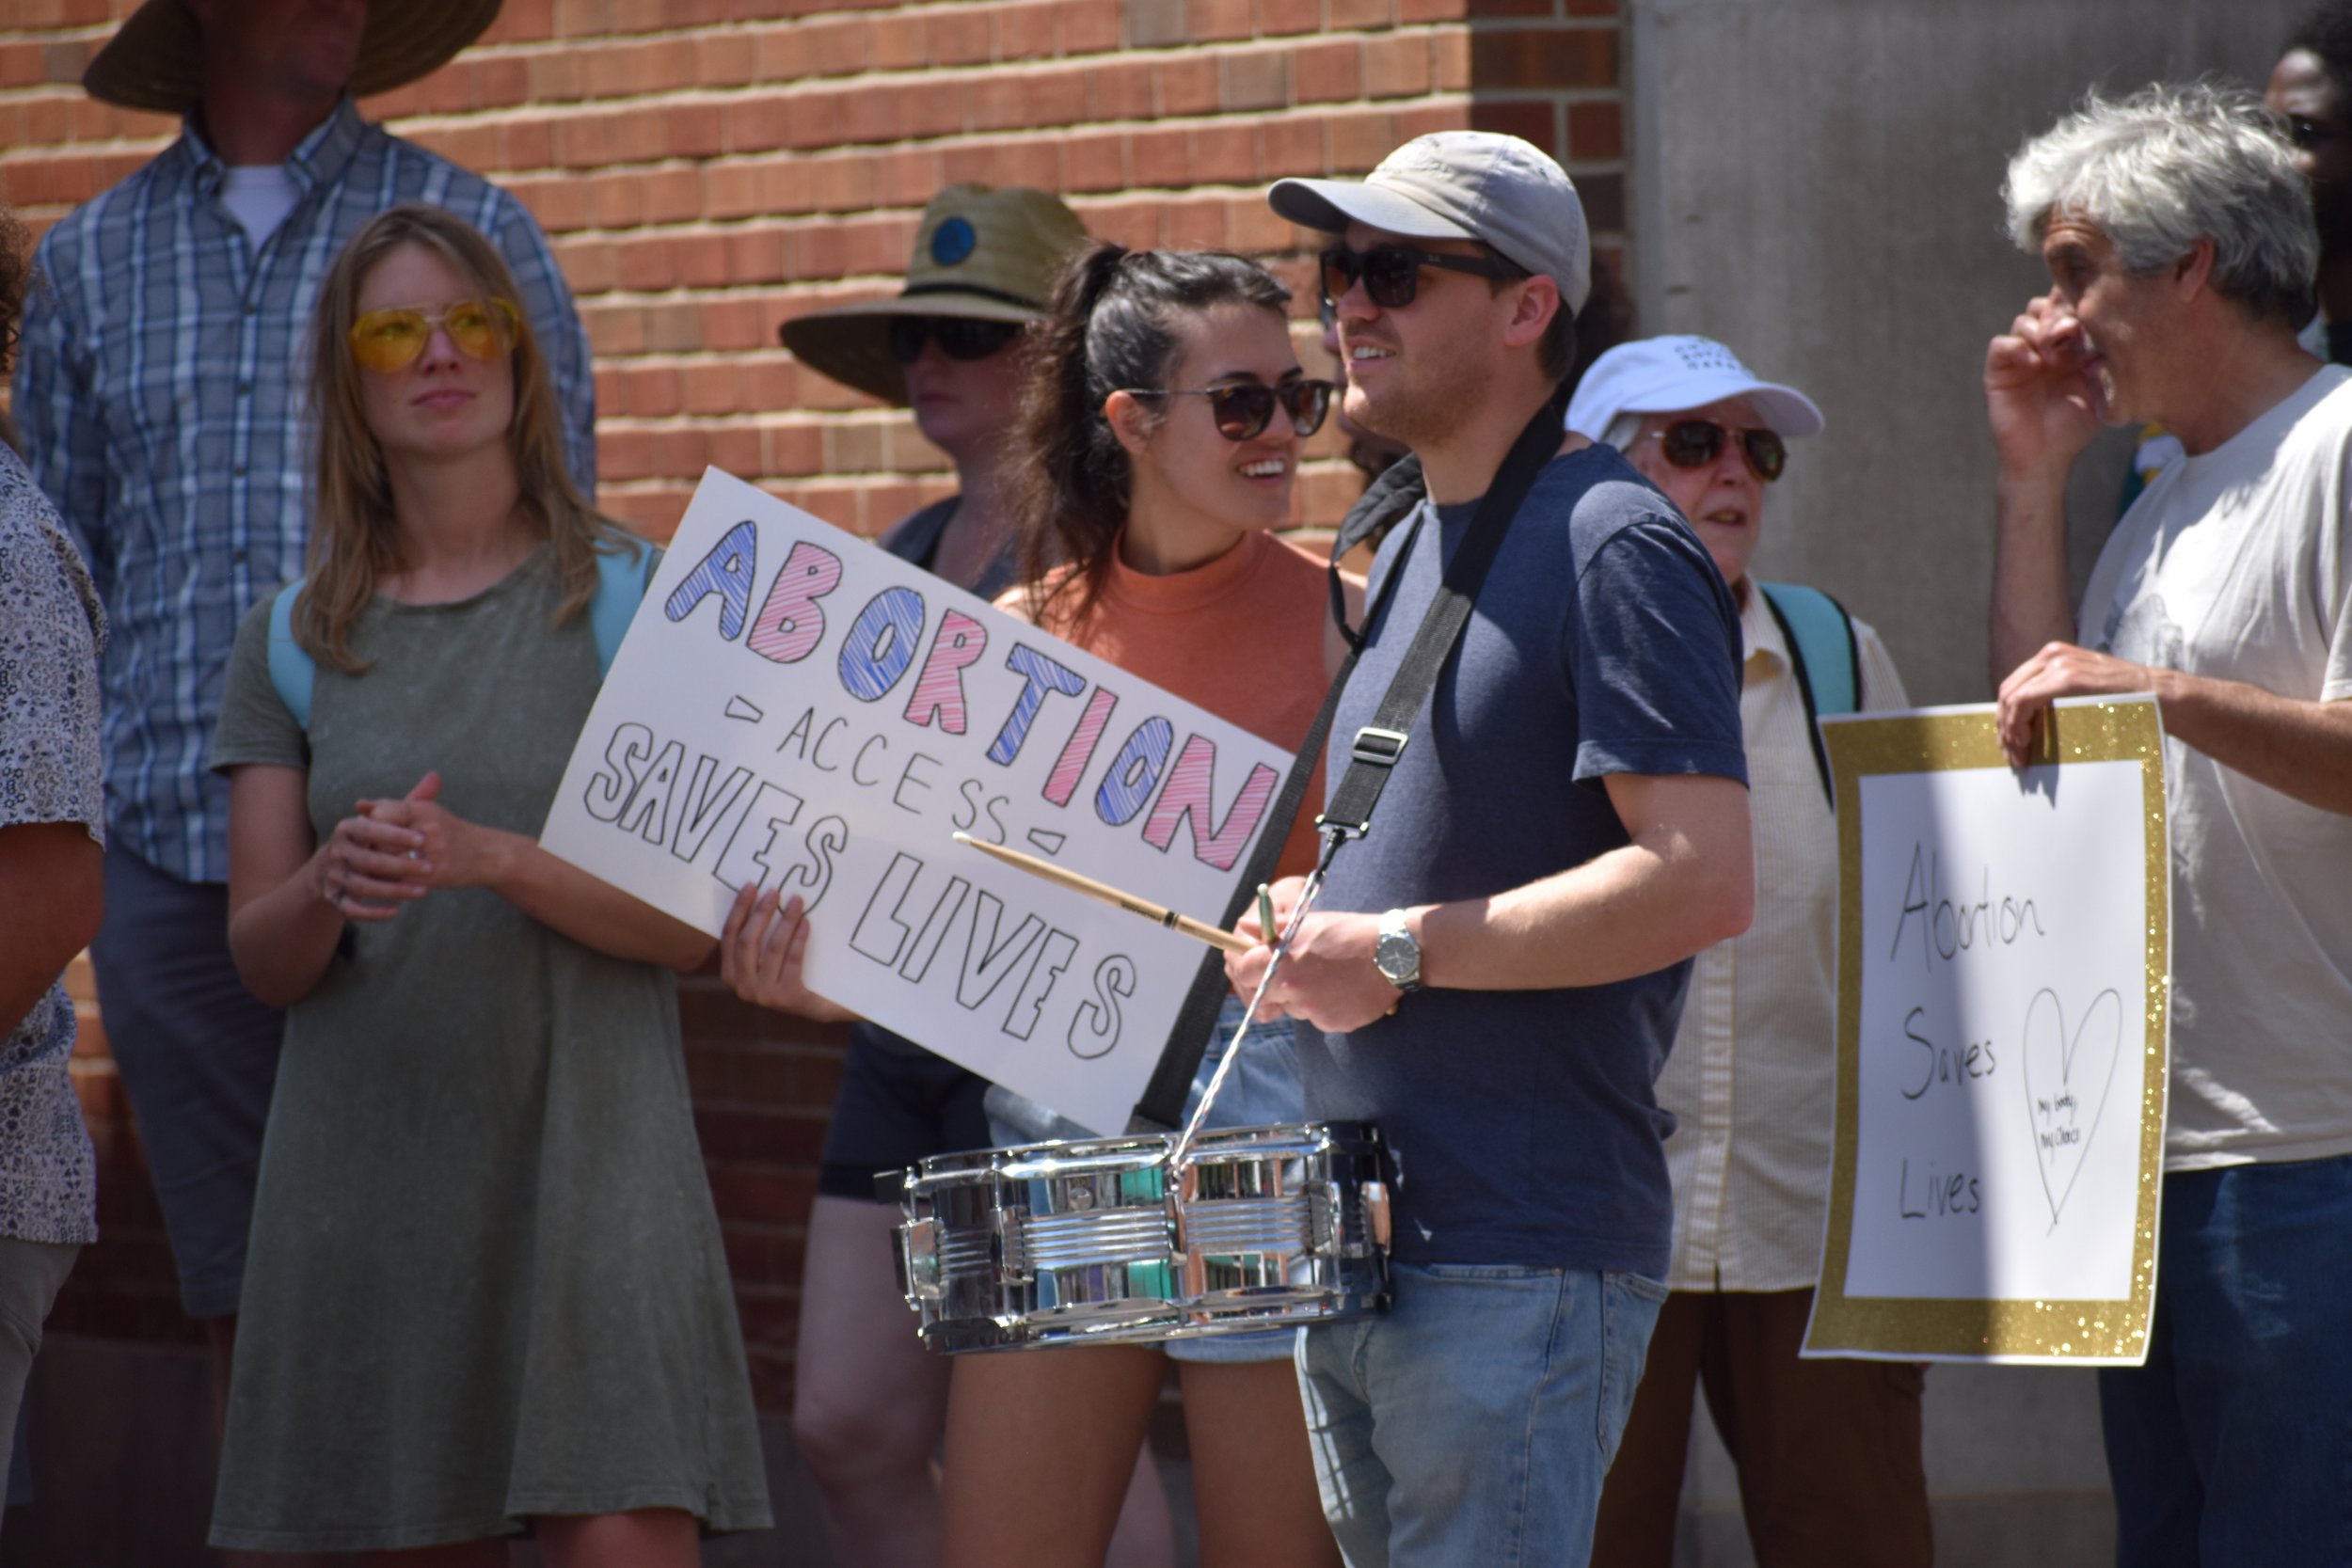  A protestor drums along as the group marches down Court Street. Photo by Bo Kuhn. 